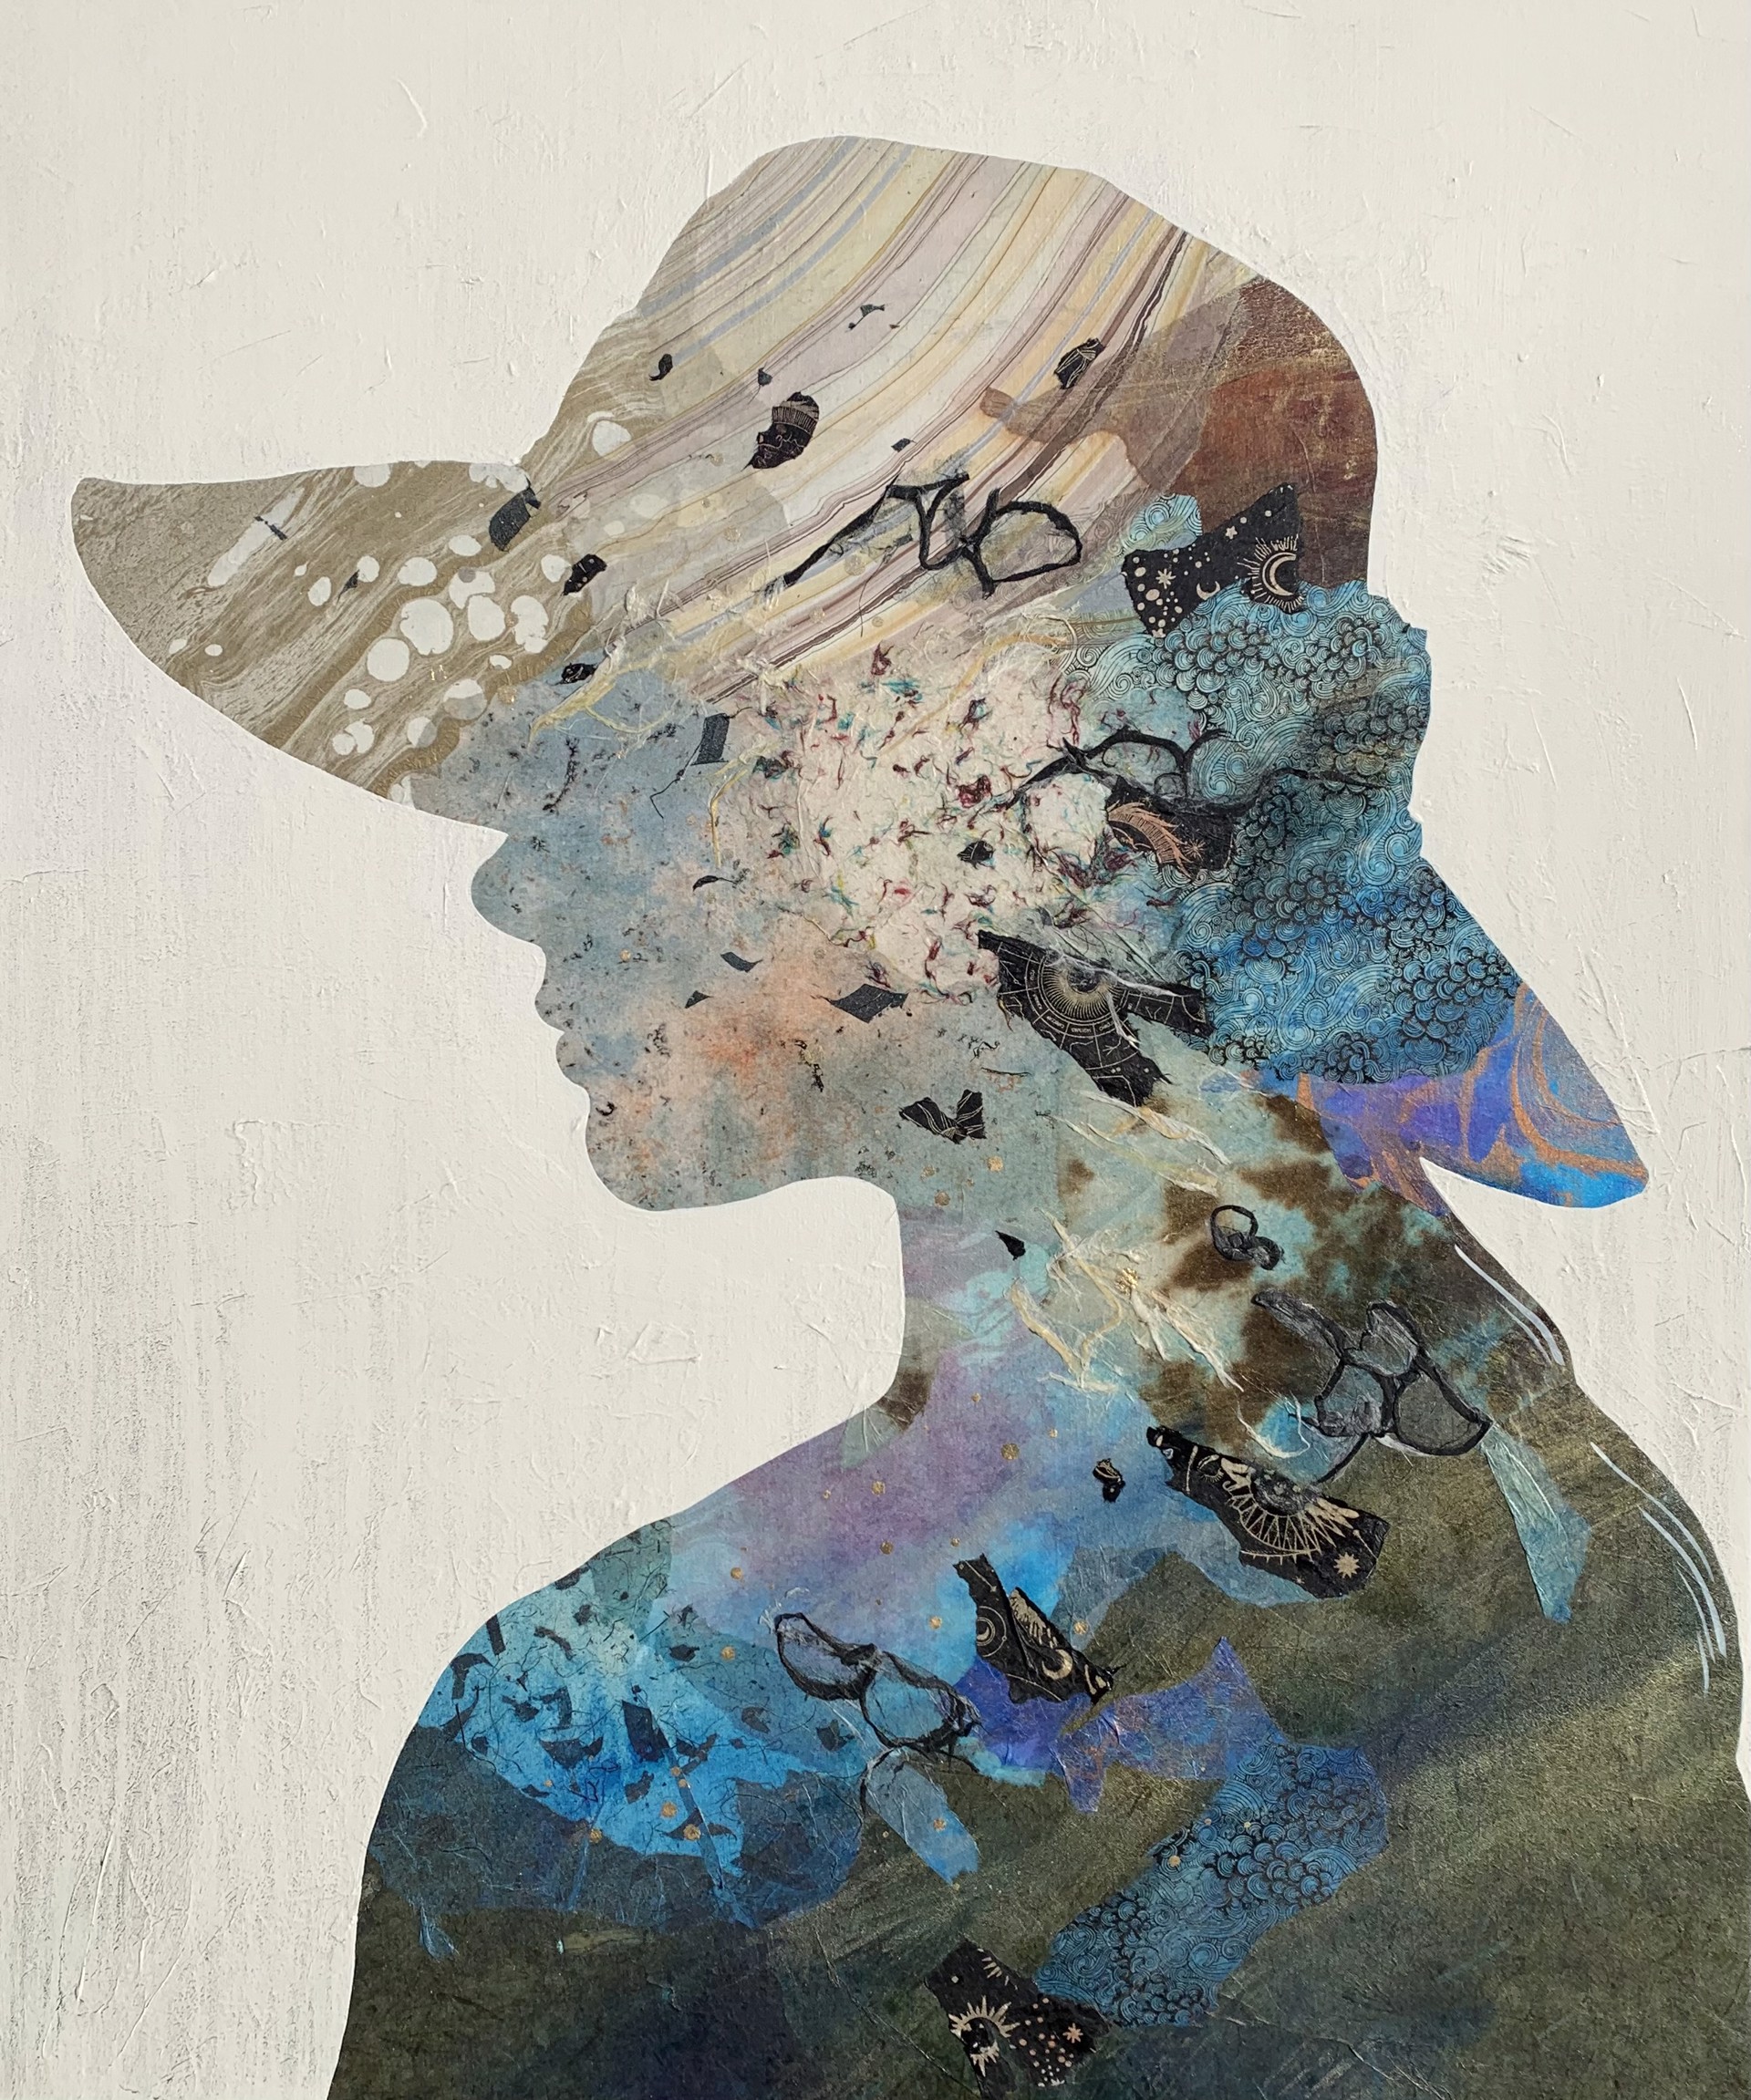 An abstract painting inside the silhouette of a woman in a beach hat on